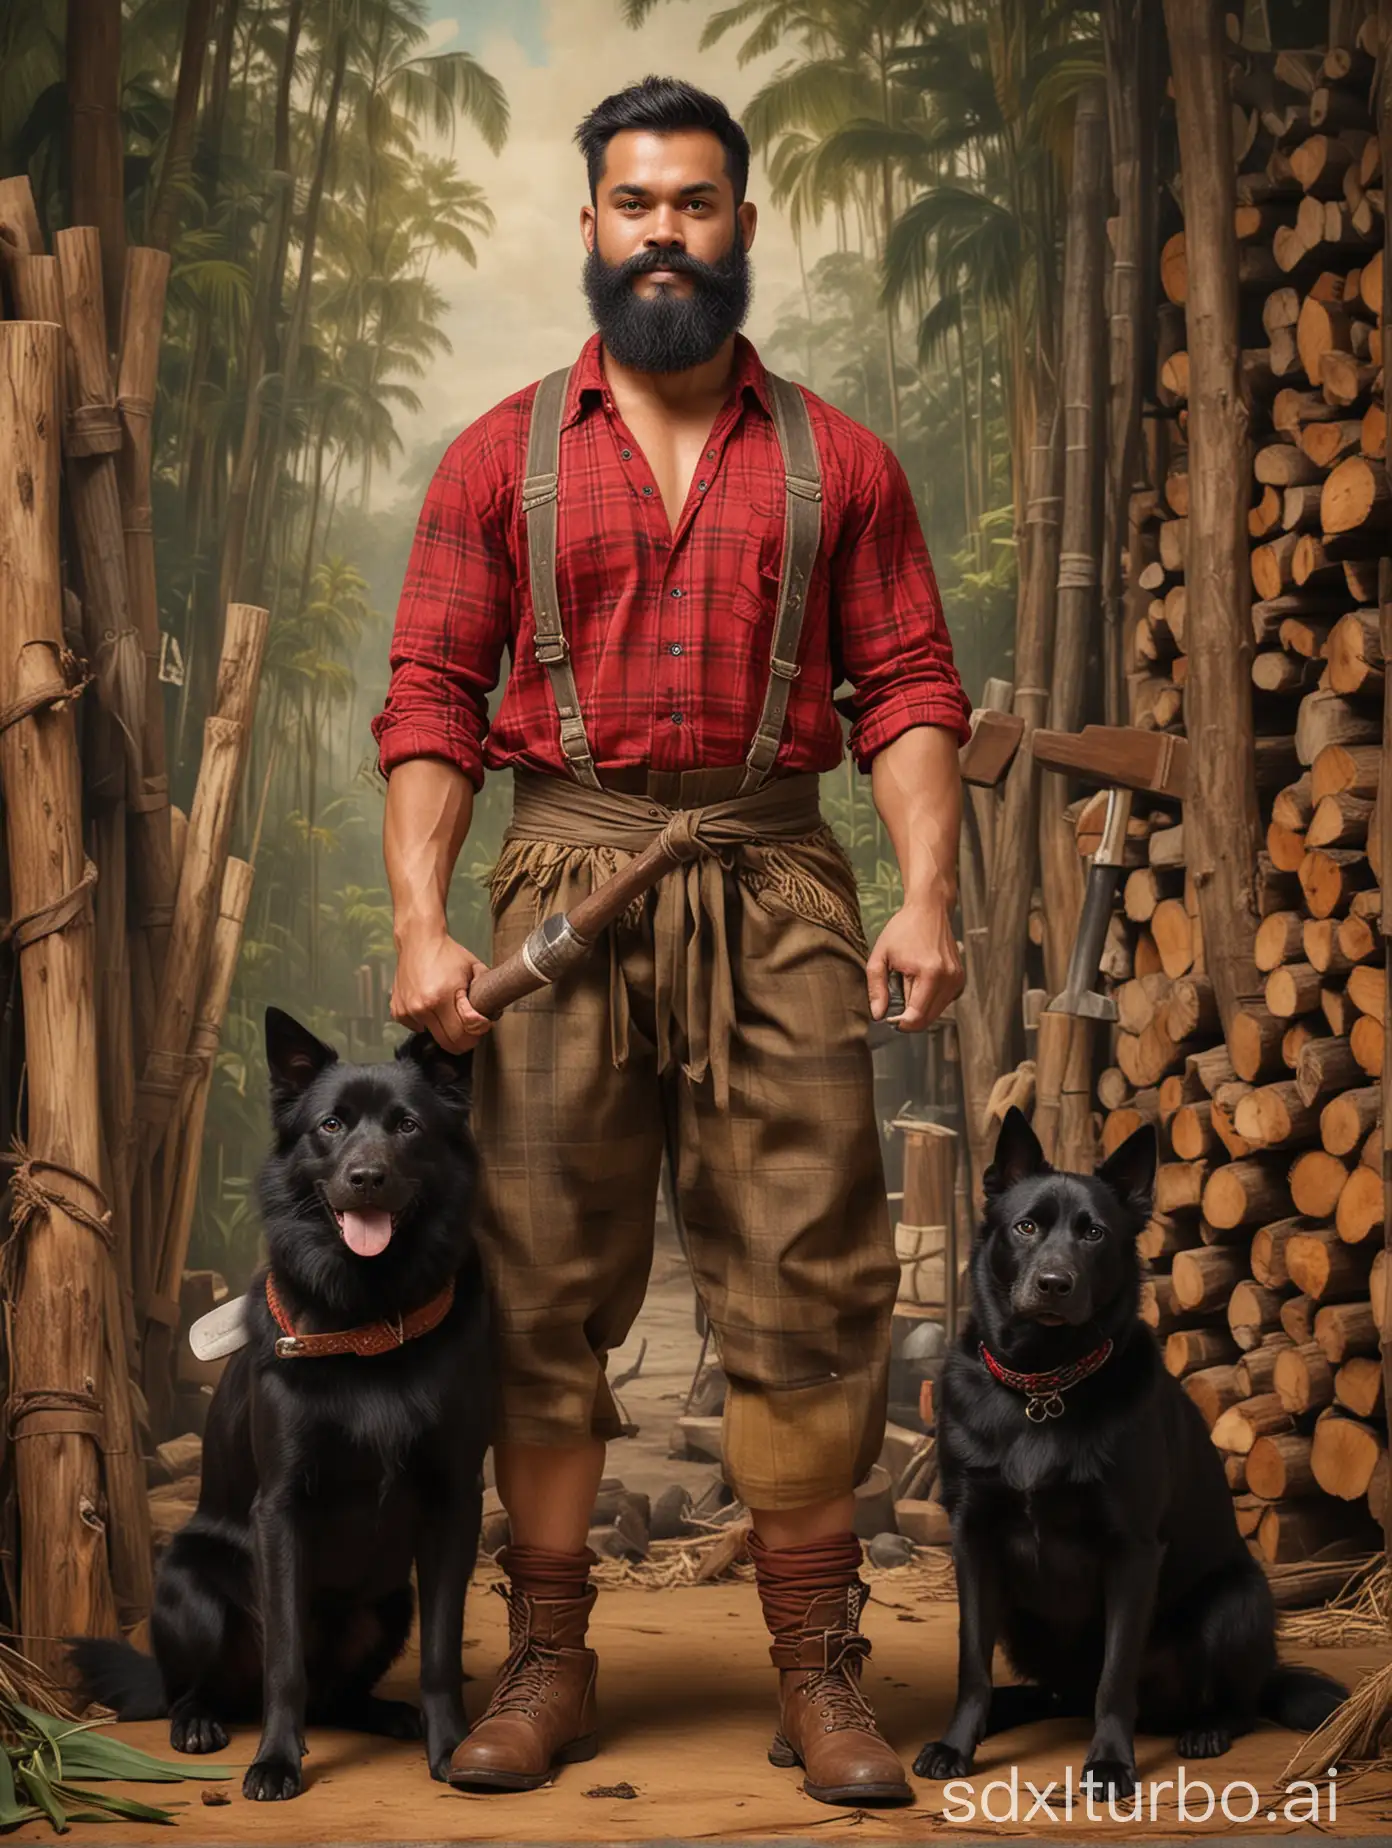 A full-body shot of a handsome, bearded, strongman Brazil-Philipino descent guy, in a Balinese traditional lumberjack costume, holding an axe. With a black dog pet nearby, With a background of a traditional Javanese lumber mill in the style of painting by Leyendecker.